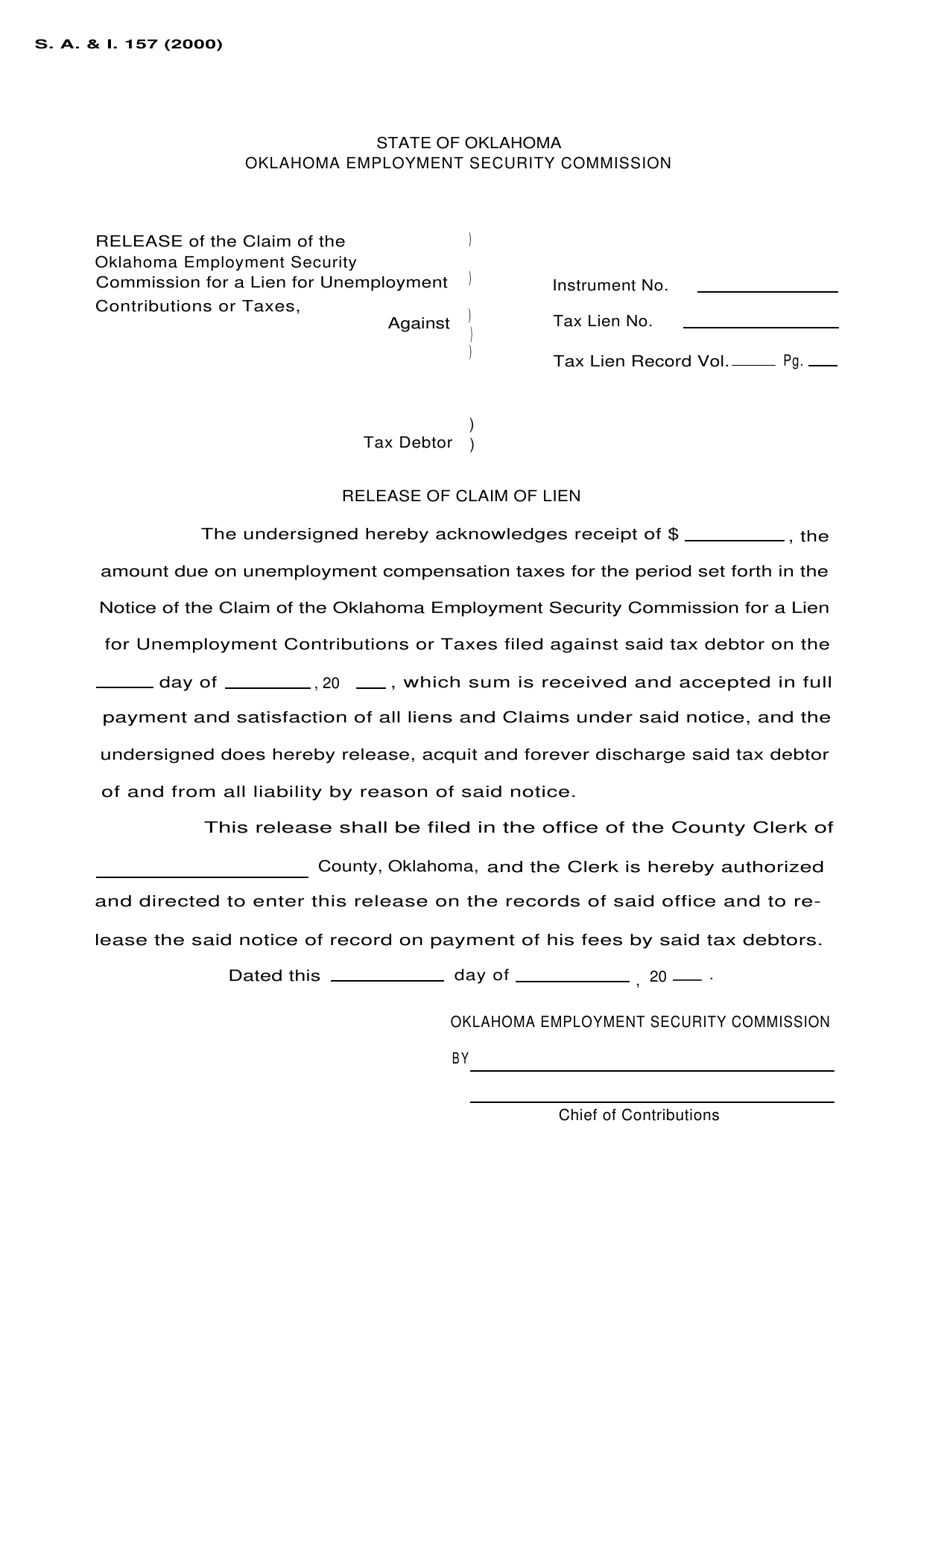 Form S.A. I.157 Release of Claim of Lien - Oklahoma, Page 1